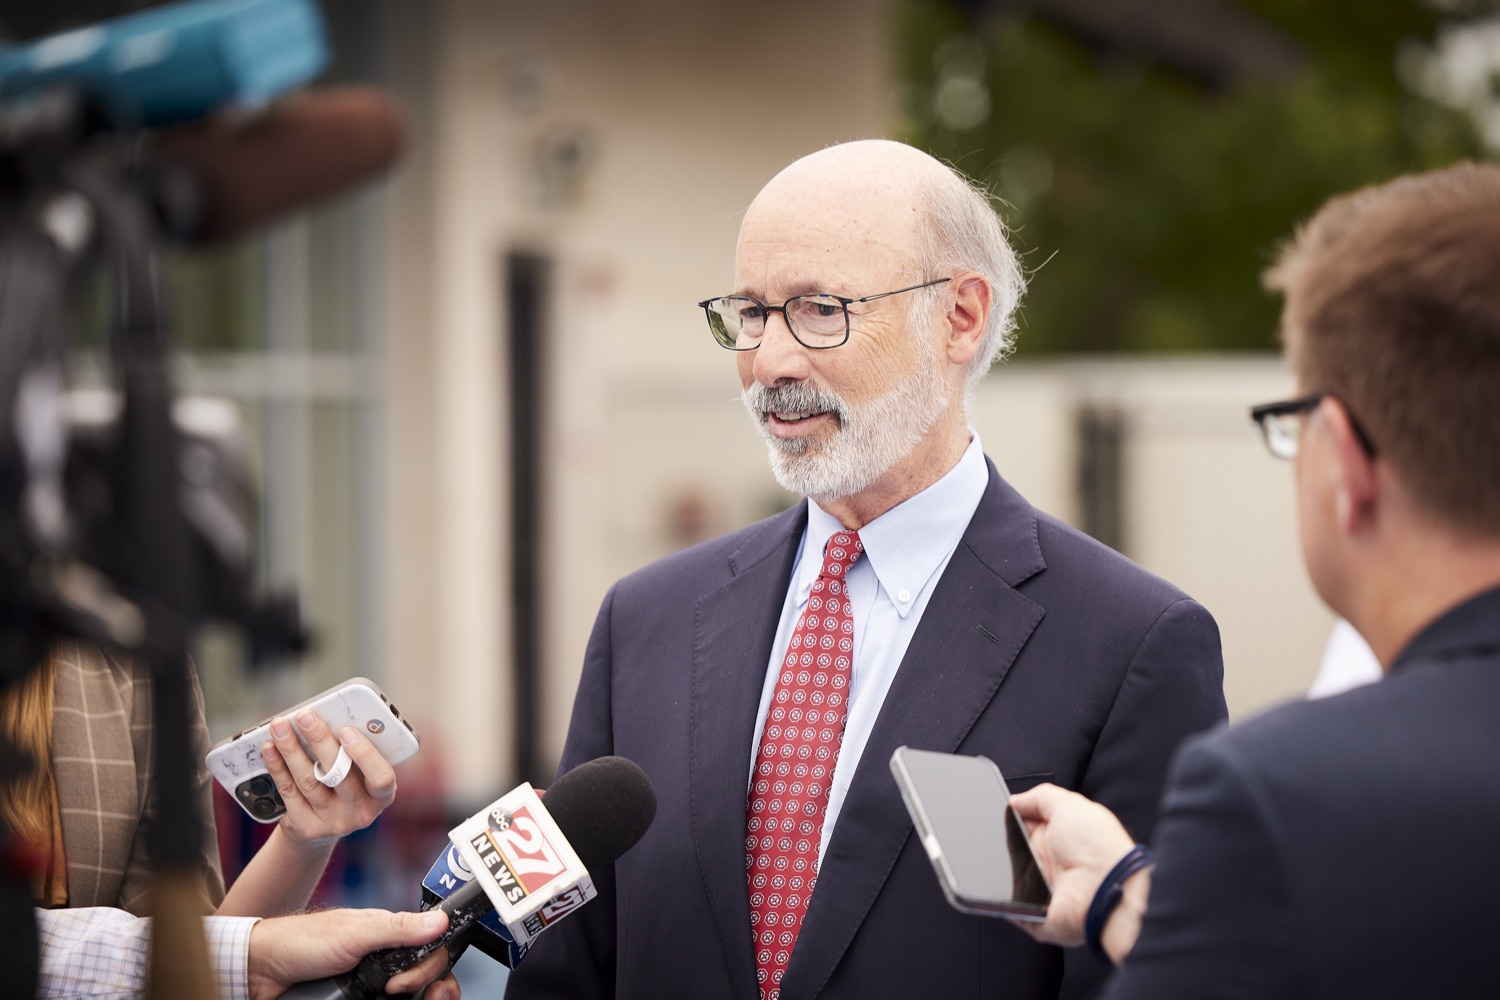 Pennsylvania Governor Tom Wolf speaks with the press.   Governor Tom Wolf today visited the Early Learning Center at Crispus Attucks in York to highlight his new state child tax credit program, modeled after the federal program, to support Pennsylvanias working families and ensure unbarred access to high-quality early childhood education.  York, PA   July 26, 2022<br><a href="https://filesource.amperwave.net/commonwealthofpa/photo/22049_gov_childTaxCredit_dz_019.JPG" target="_blank">⇣ Download Photo</a>